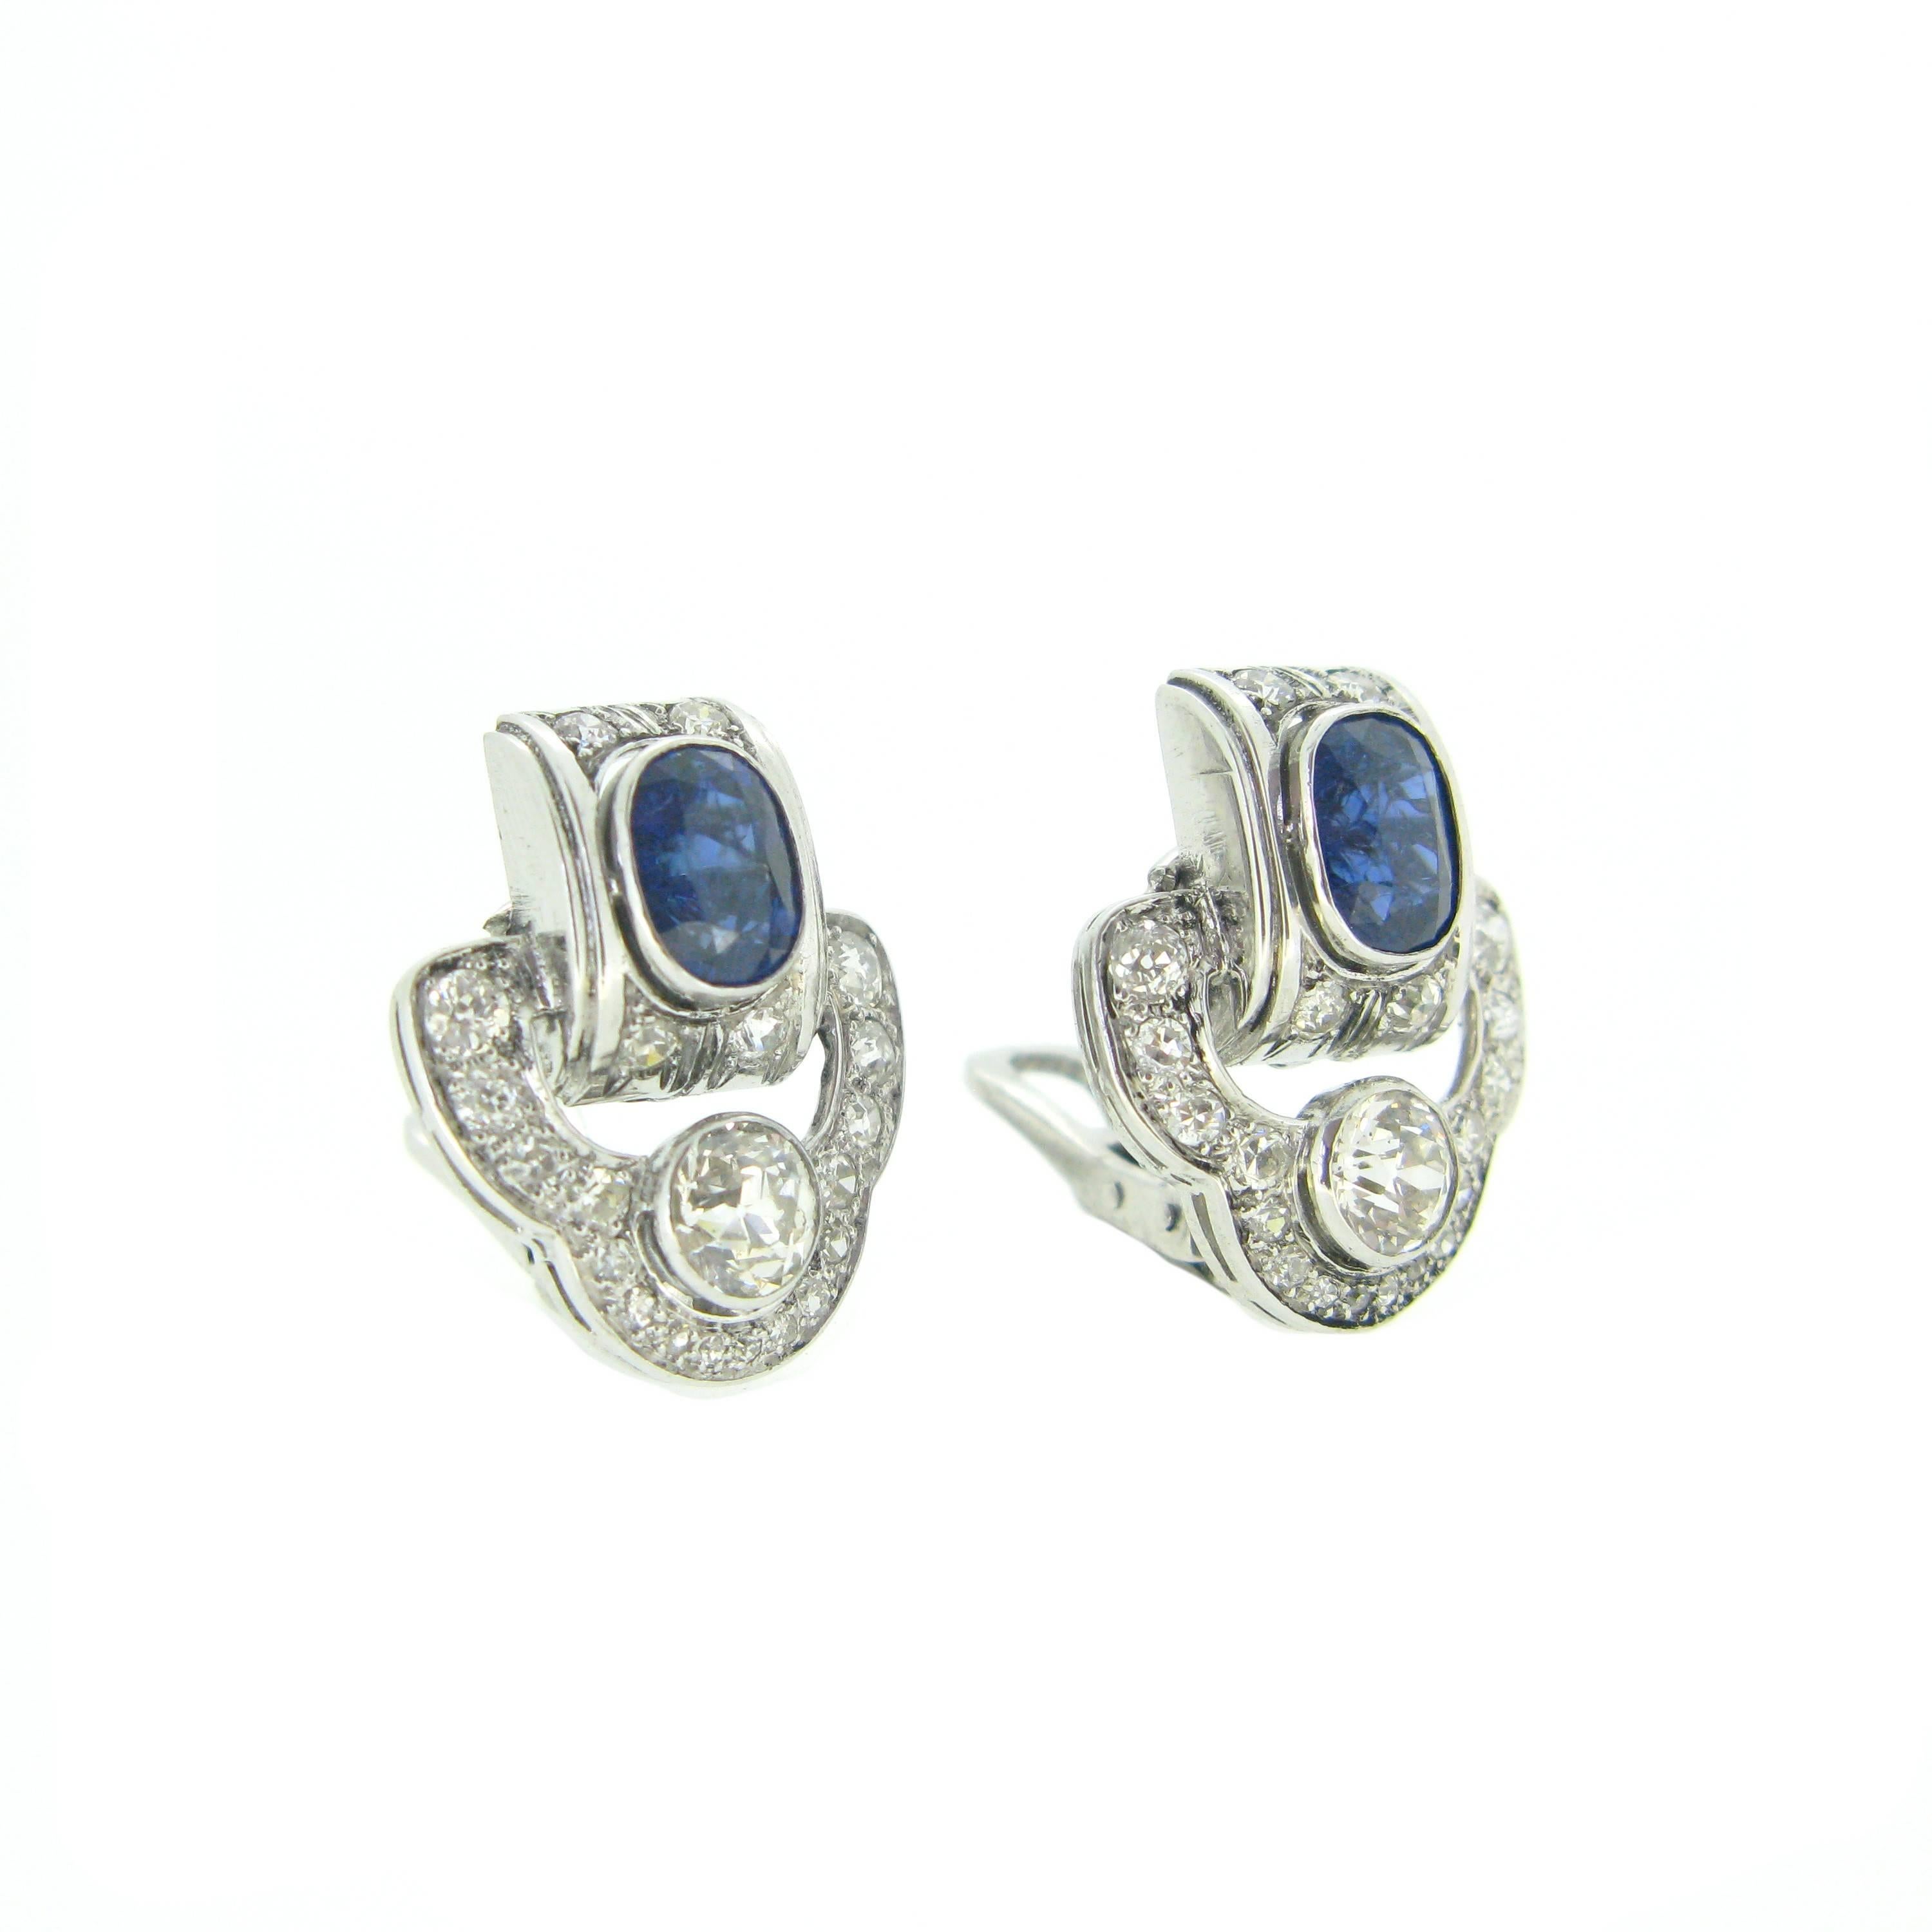 Oval Cut Art Deco Sapphire and Diamonds White Gold and Platinum Earrings